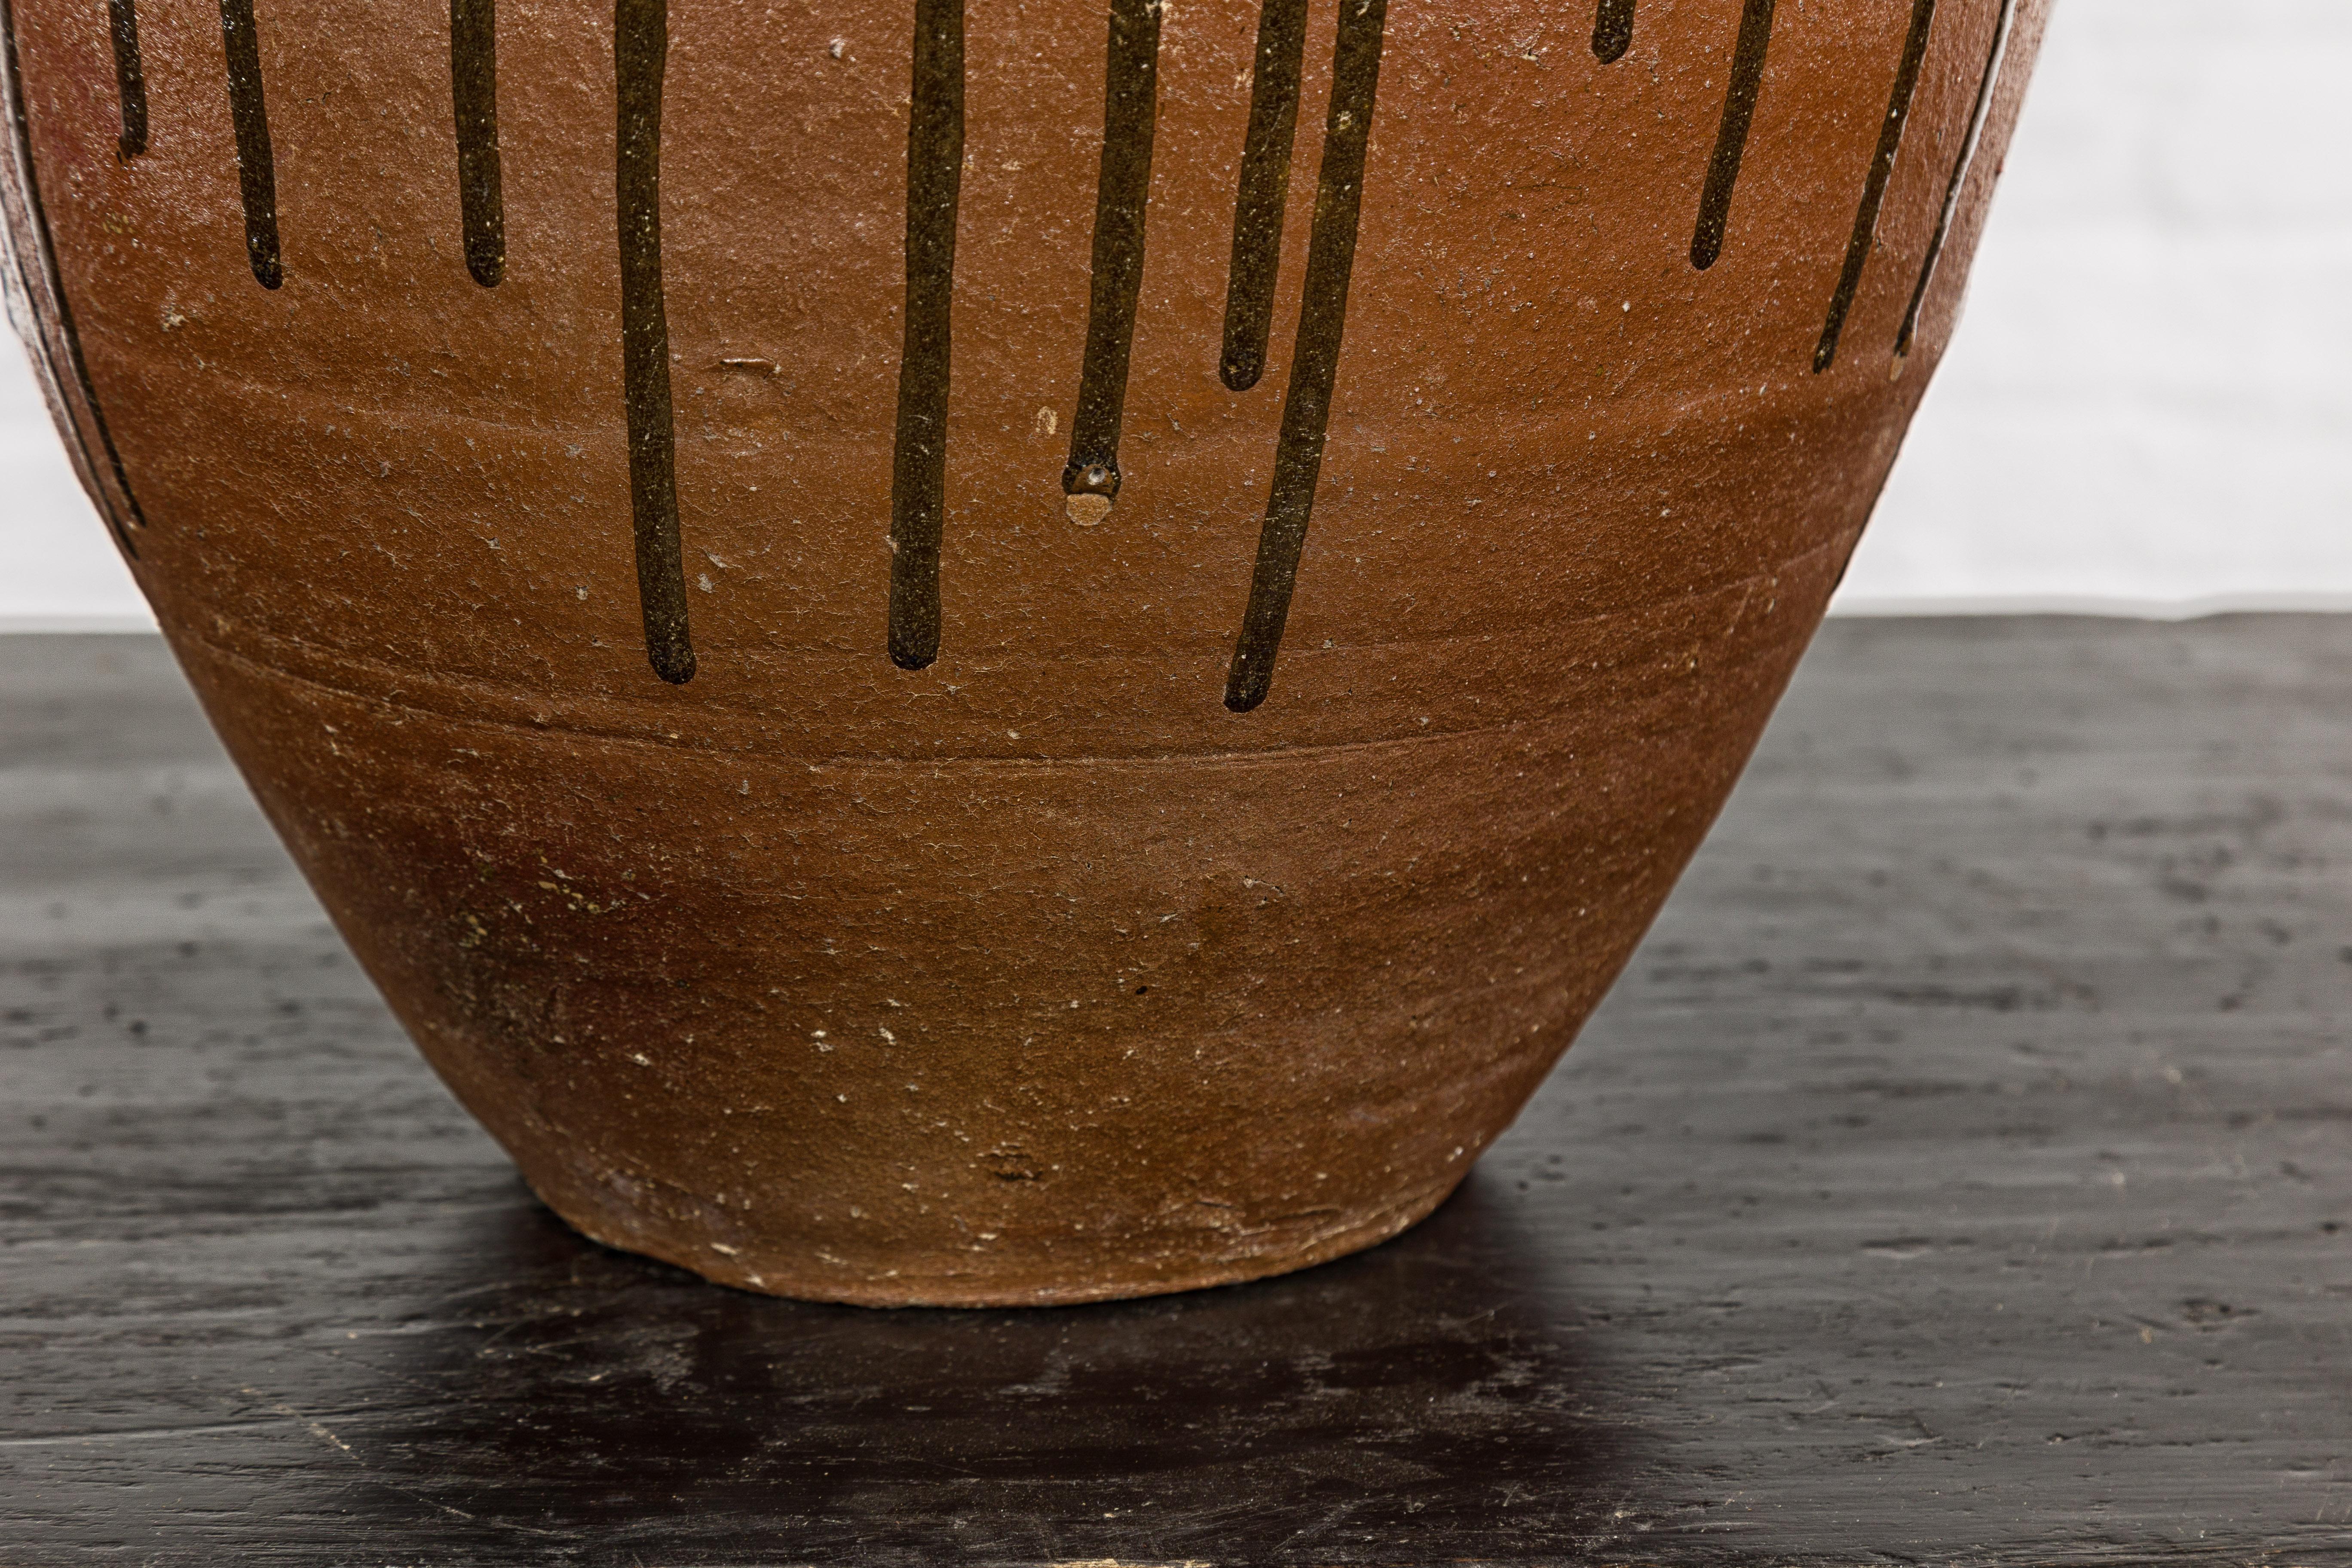 Japanese Tamba Ware Brown Glazed Ceramic Salt Pot Planter with Dripping For Sale 3